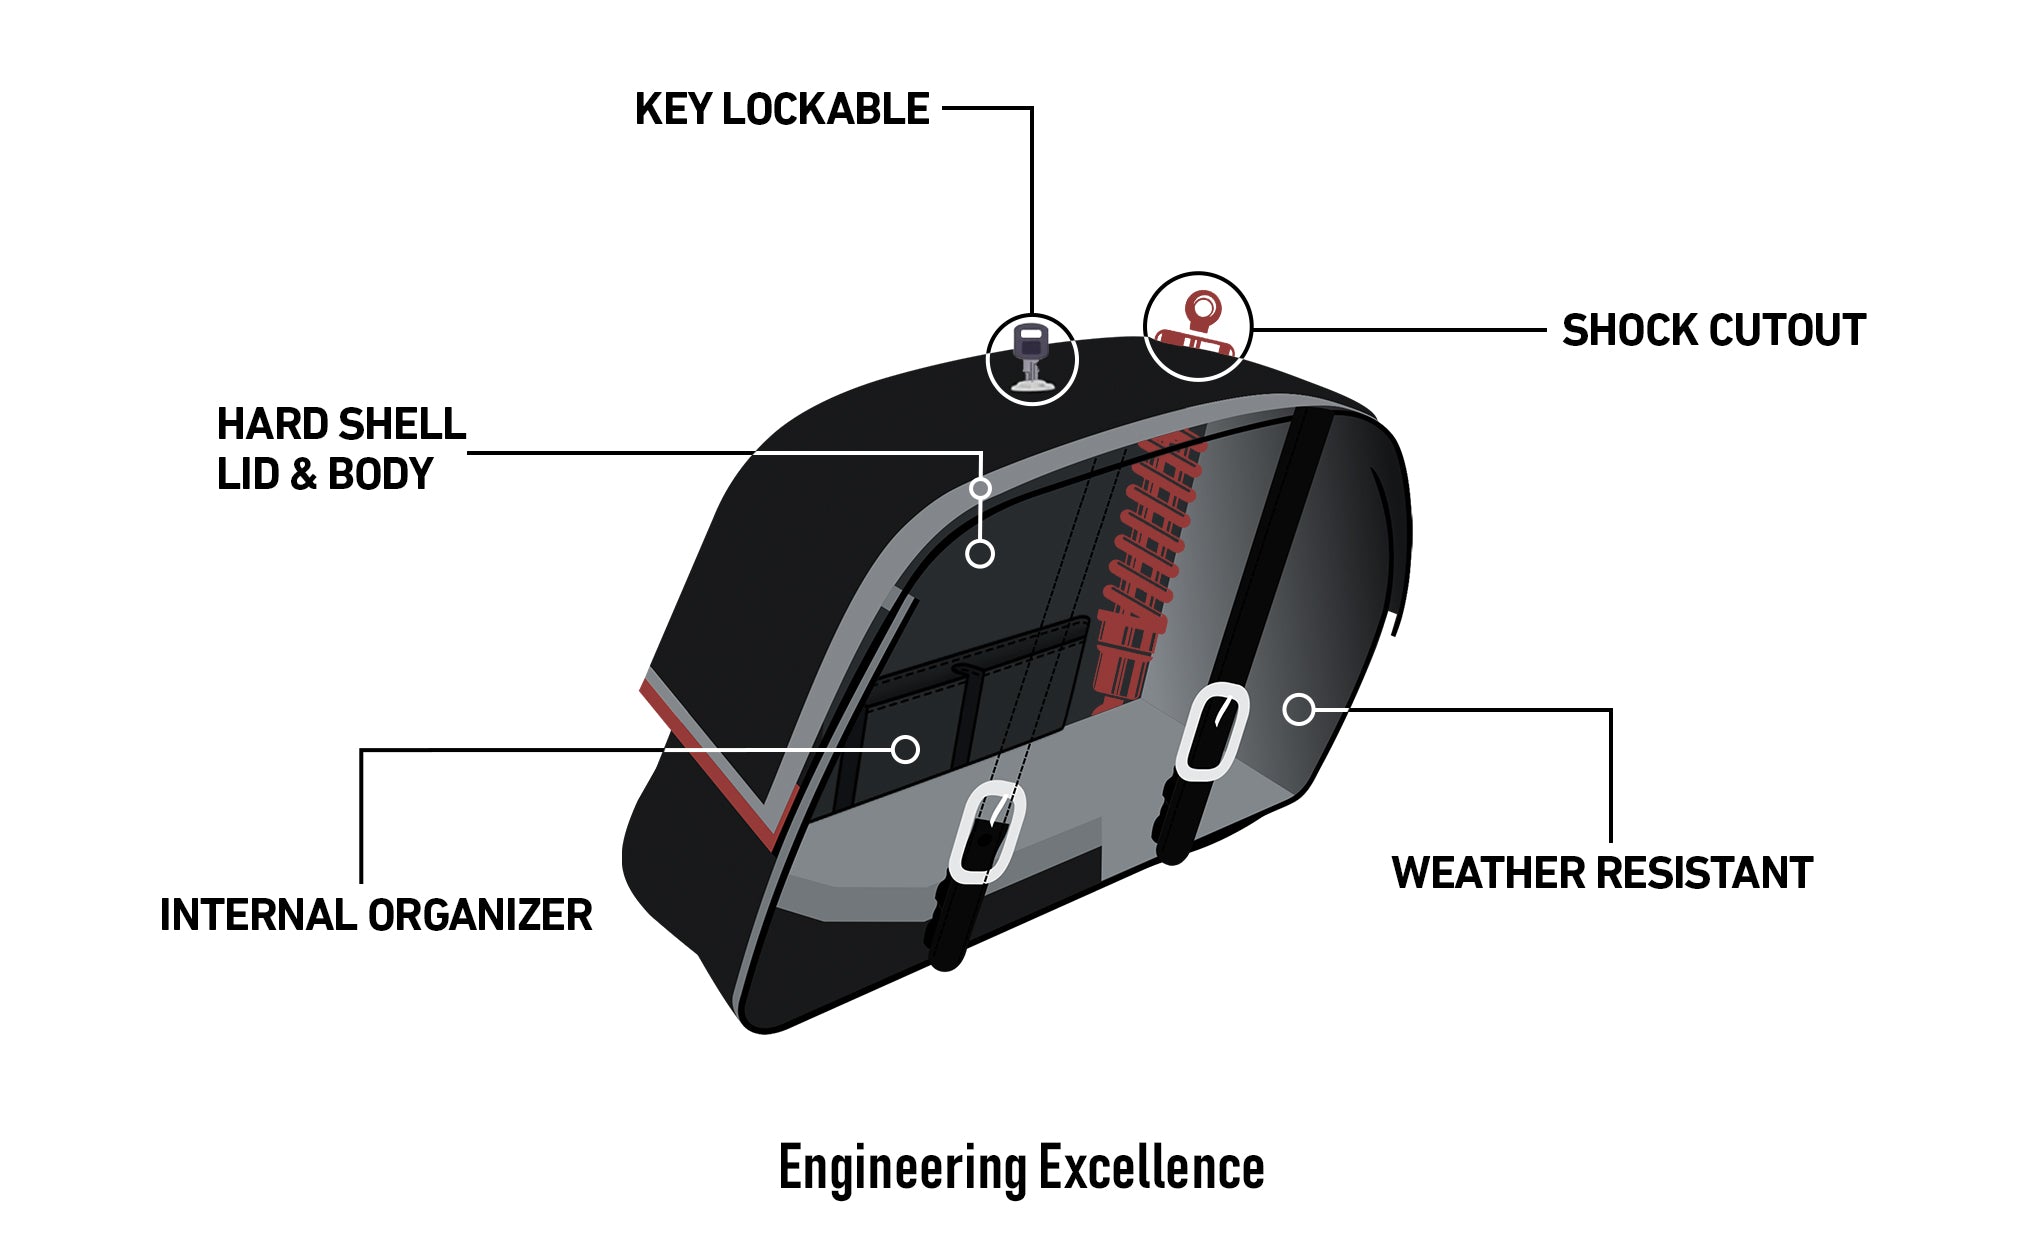 Viking Skarner Large Shock Cut Out Leather Motorcycle Saddlebags For Harley Dyna Super Glide Fxd I Engineering Excellence with Bag on Bike @expand